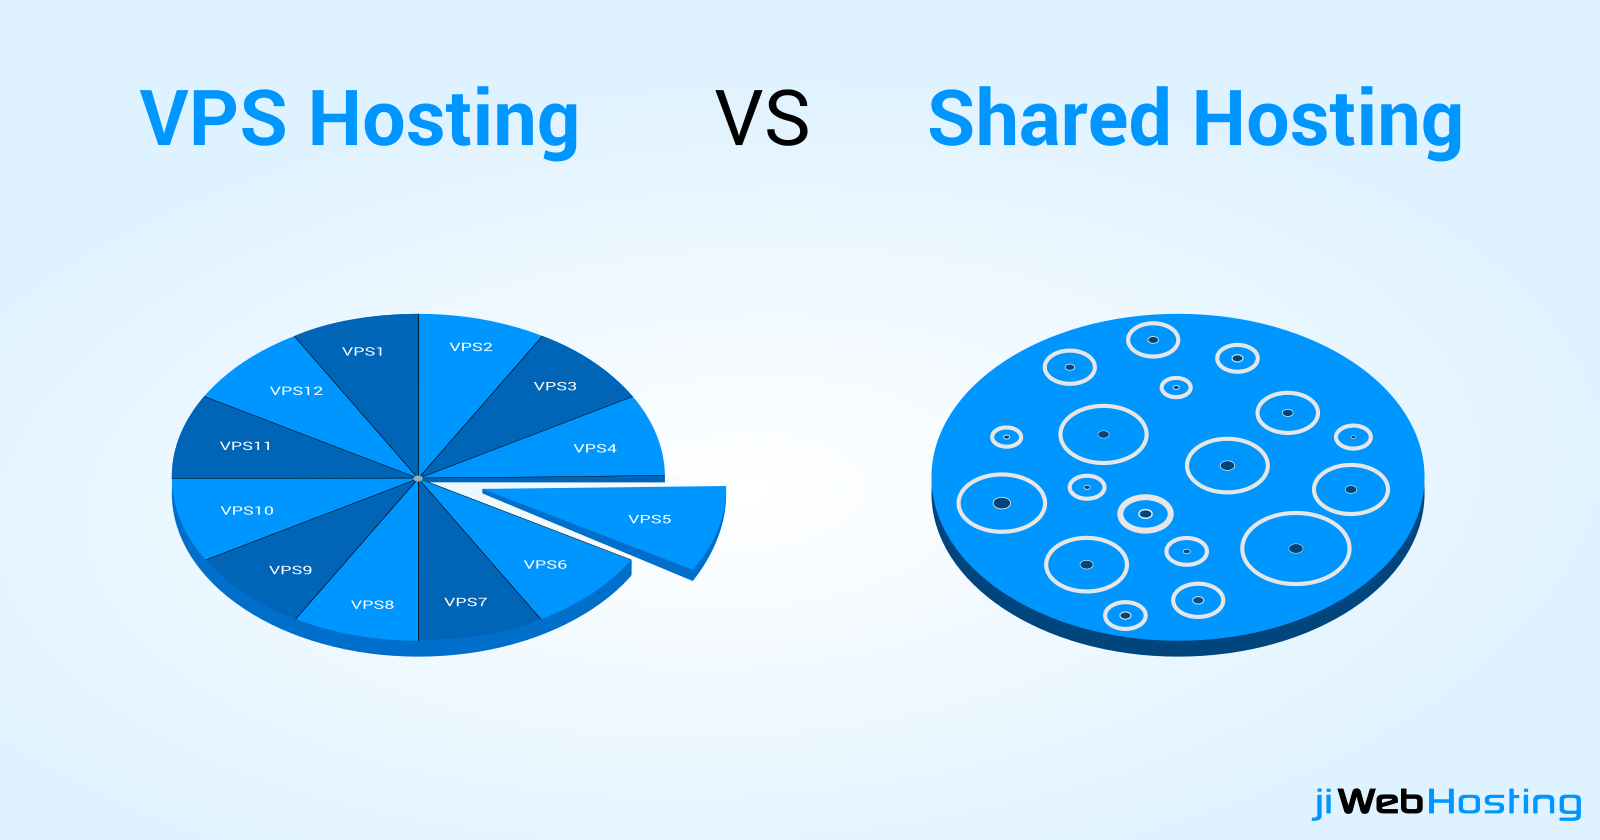 Why VPS Hosting is Better Than Shared Hosting?